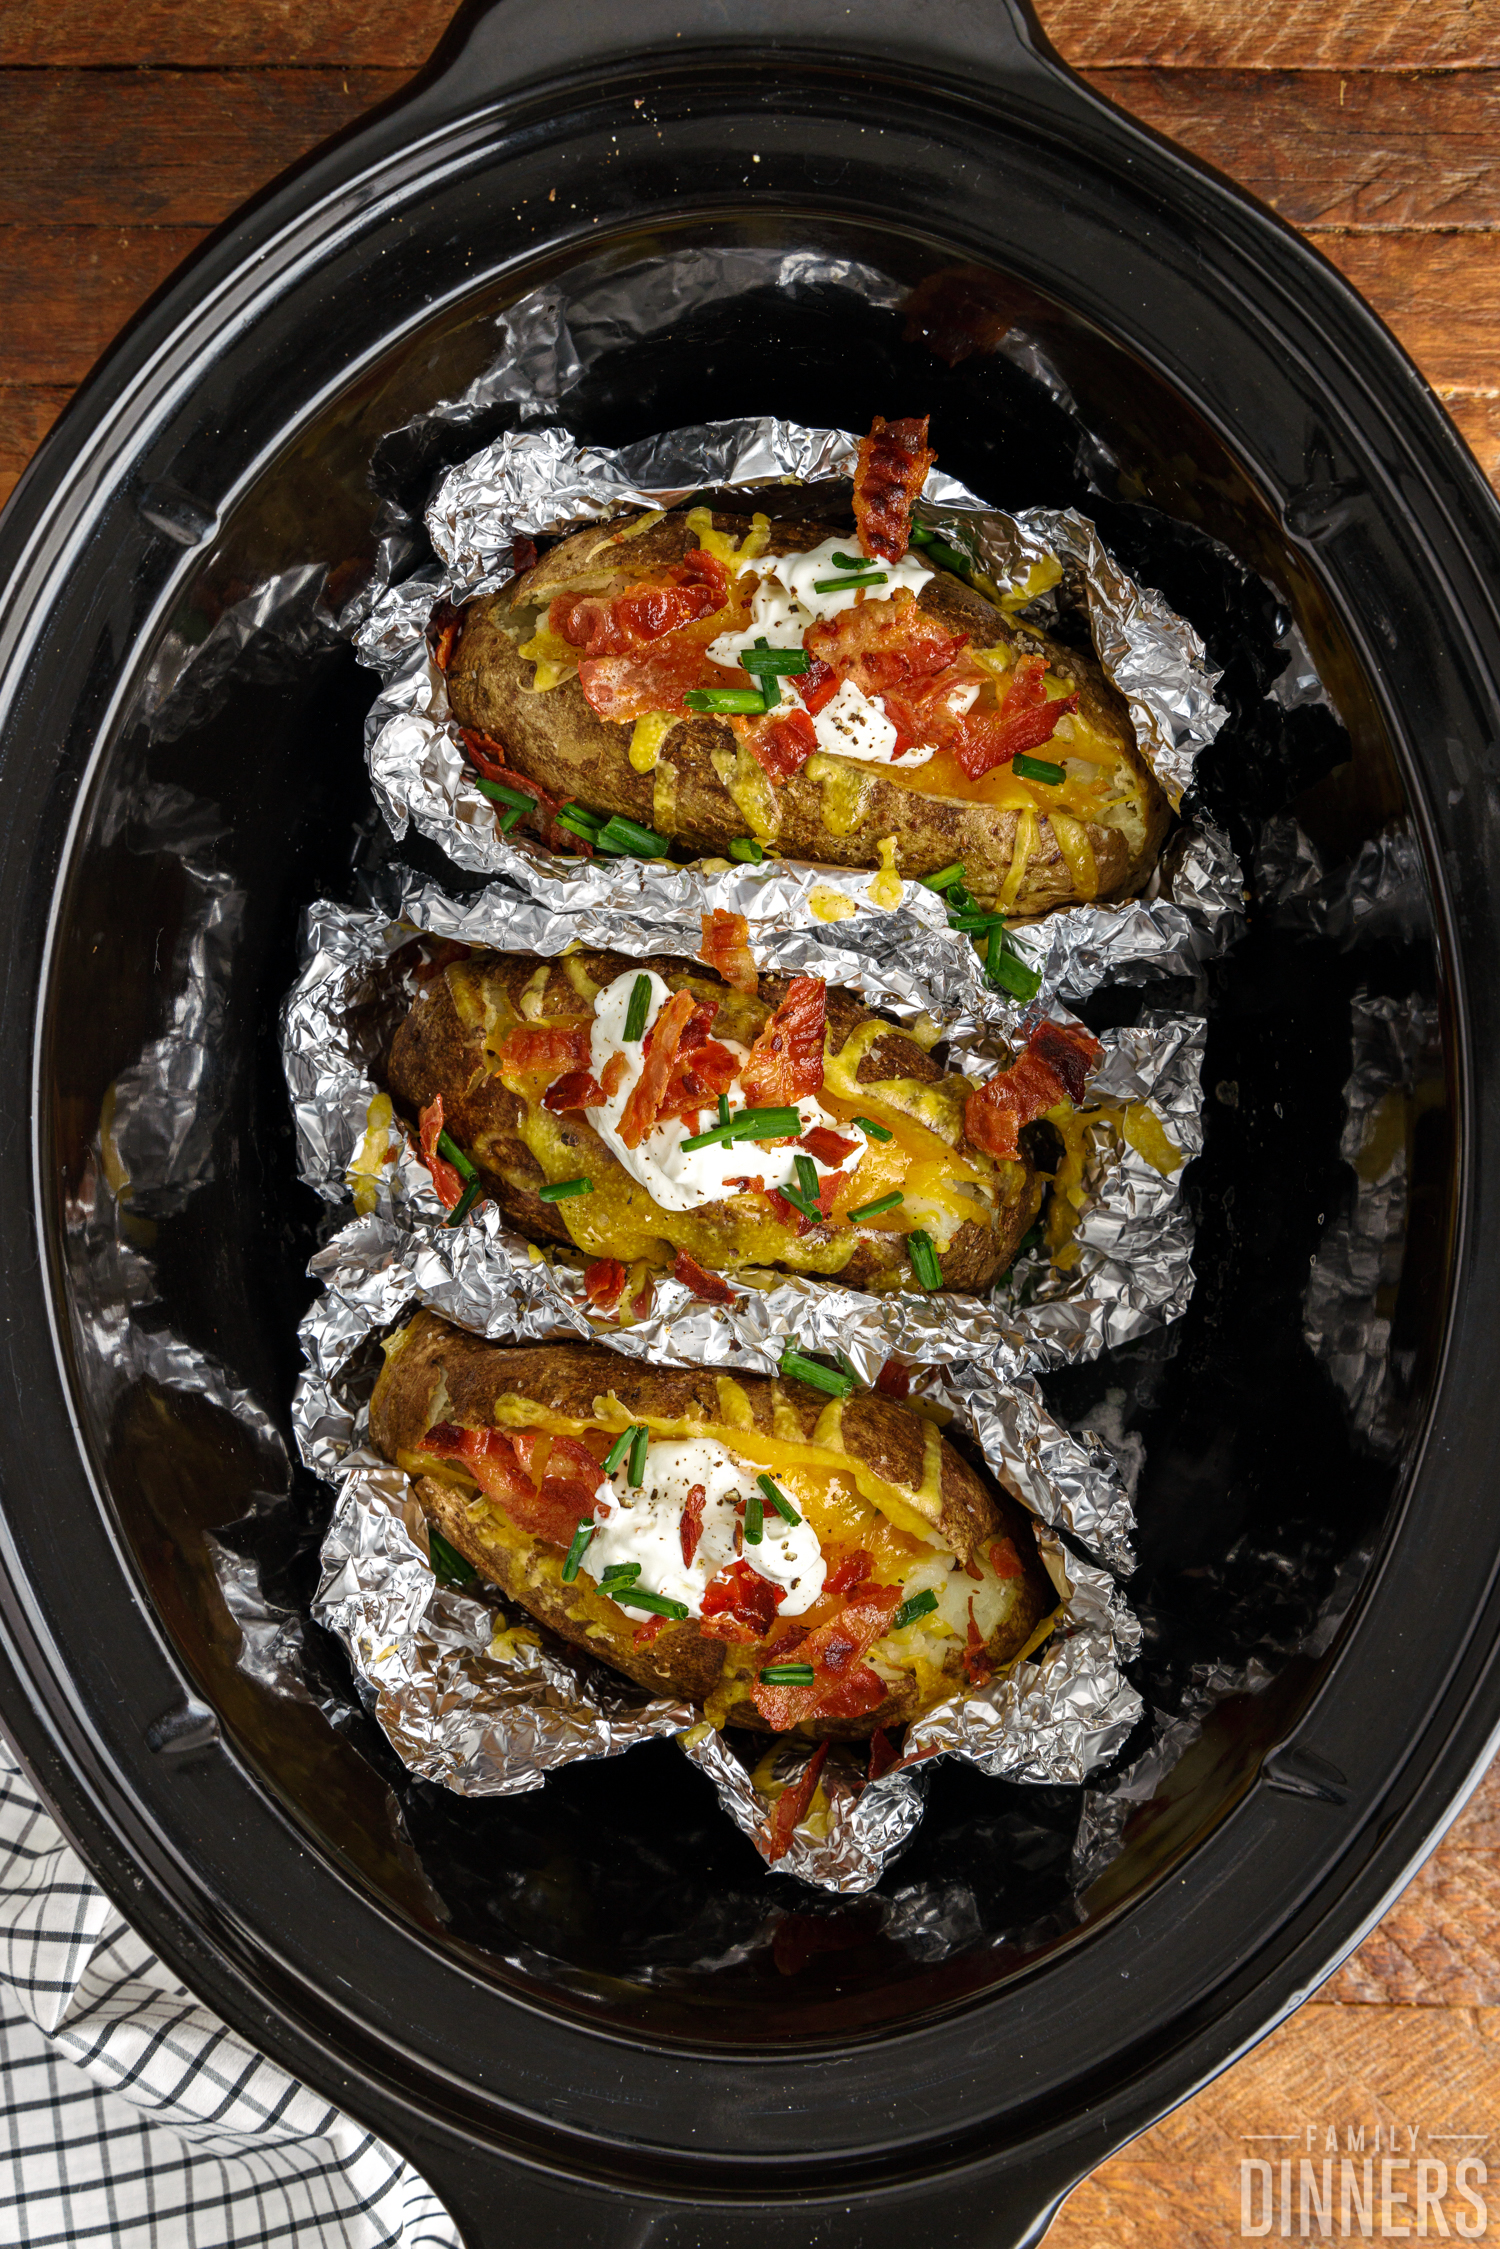 Fully-cooked baked potatoes in open foil inside a crock pot, loaded with cheddar cheese, sour cream, bacon bits and chives.